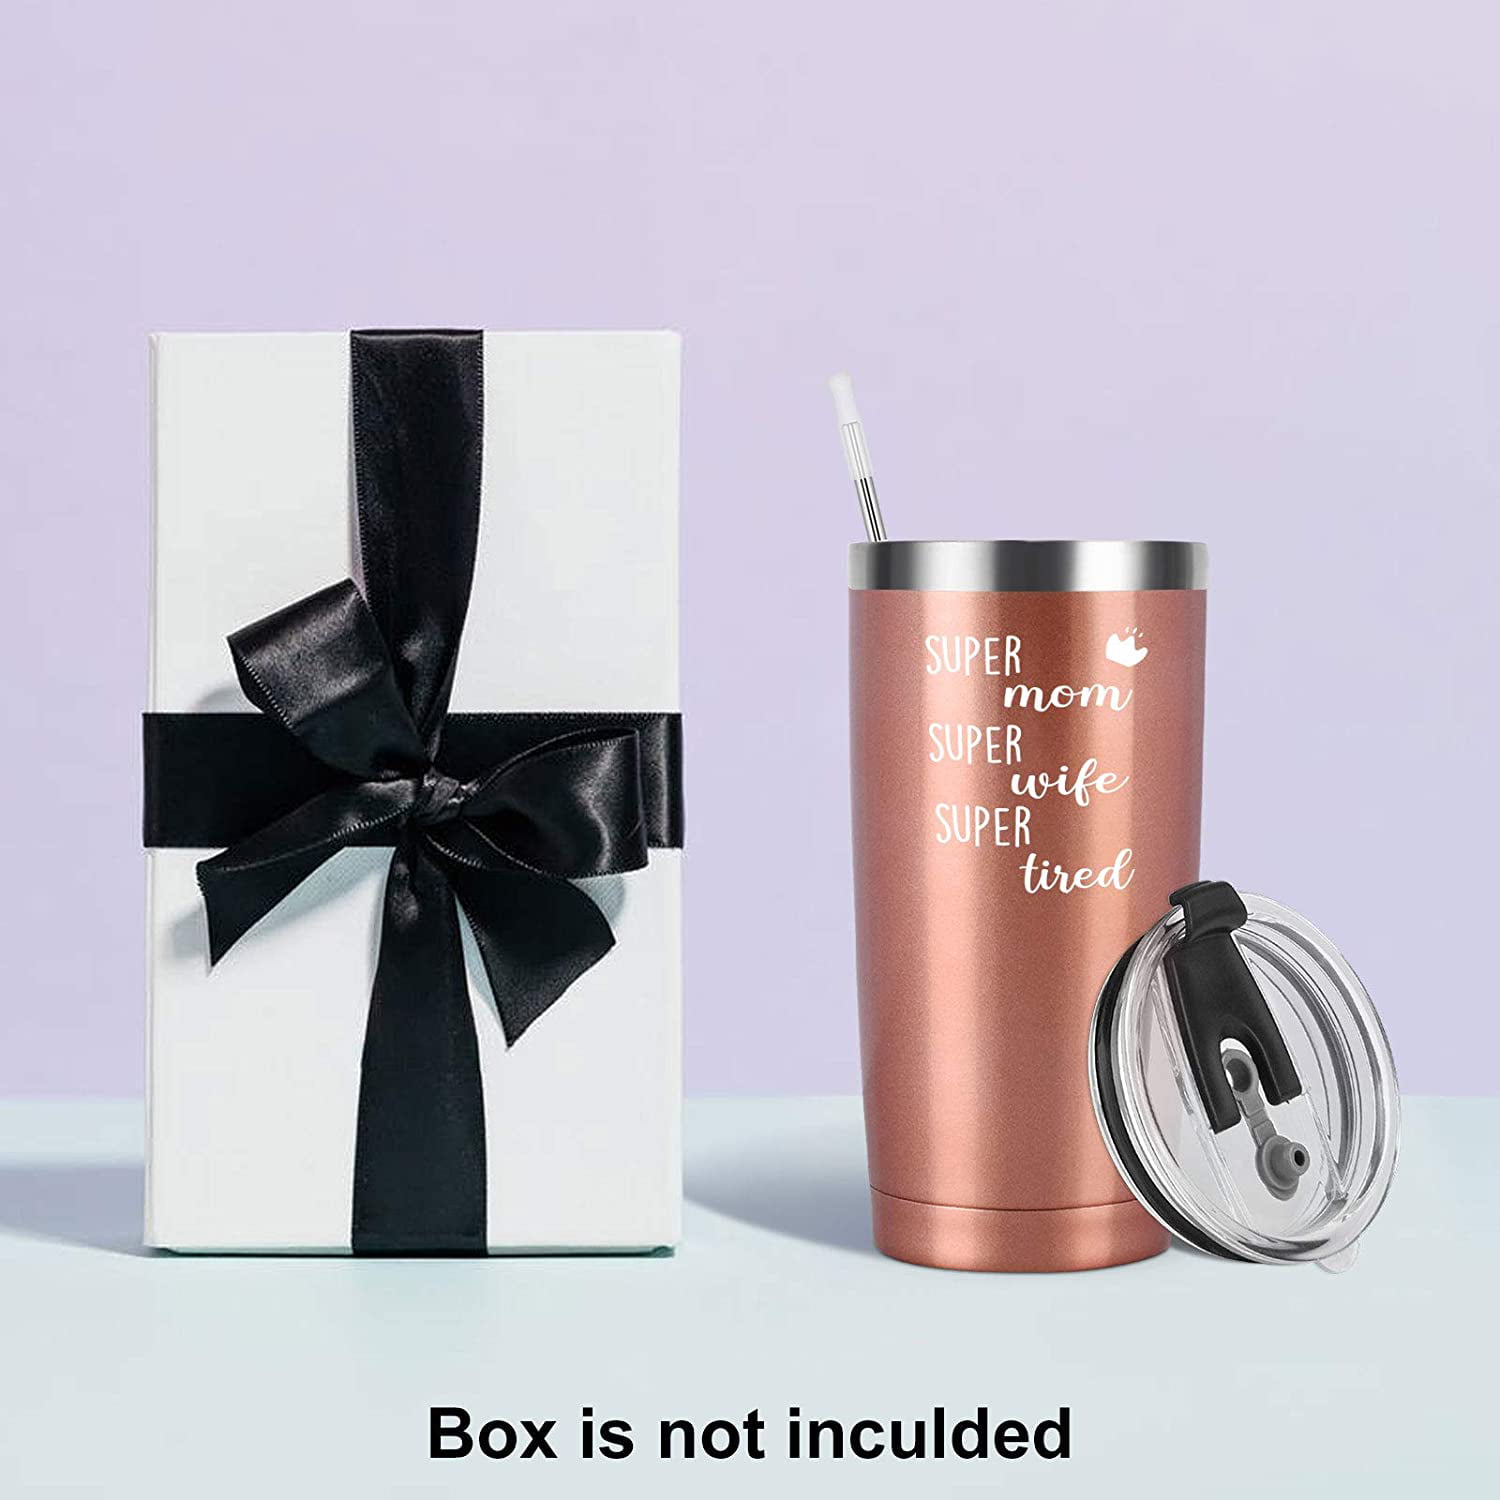 Super Mom Super Wife Super Tired Funny Stainless Steel Insulated Travel Tumbler for Mom Mama with 2 Lids and Straws 20 Oz, Mint Gingprous Mother's Day Birthday Gift for Mom Mother Mommy